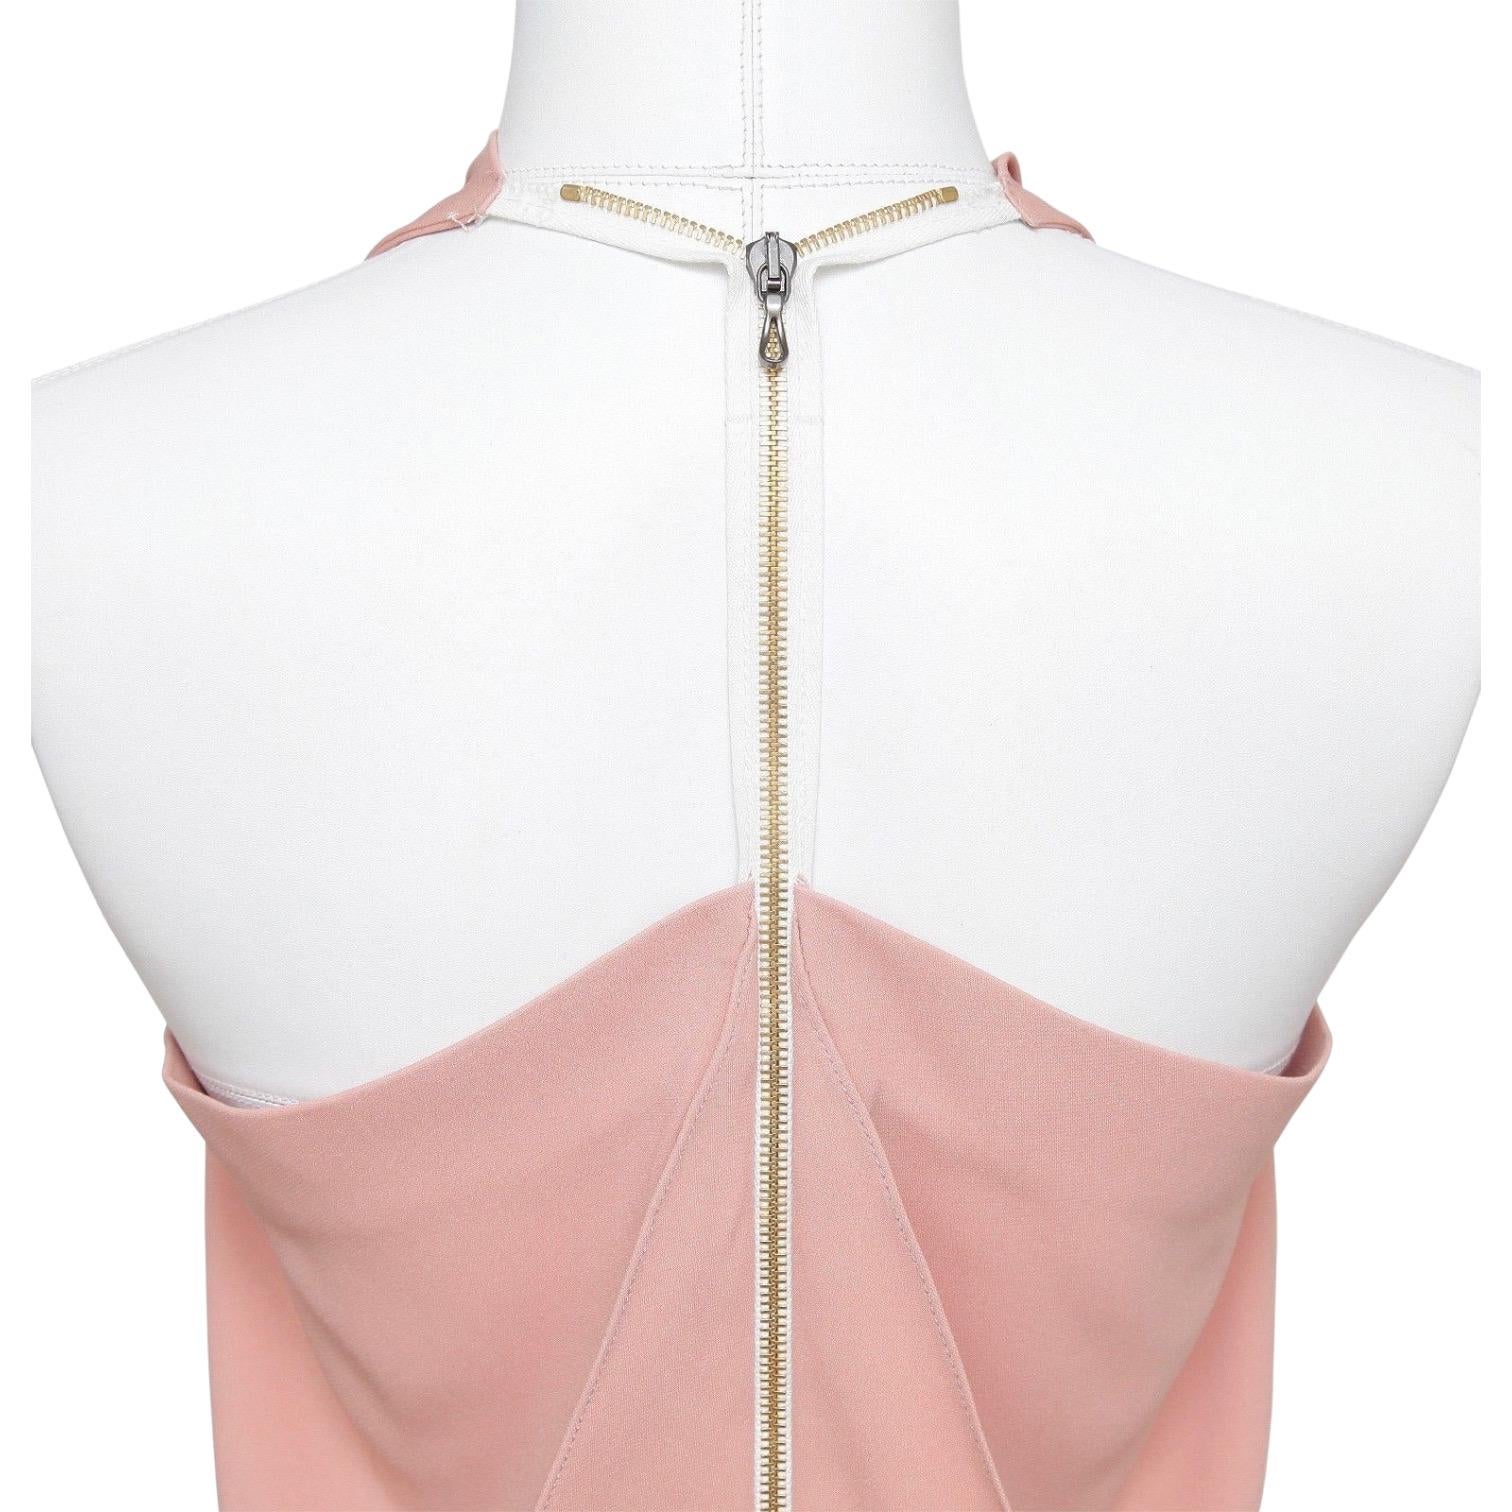 ROLAND MOURET Sleeveless Dress Cowl Neck 2016 PAGET White Pink 14 BNWT $1230 For Sale 3